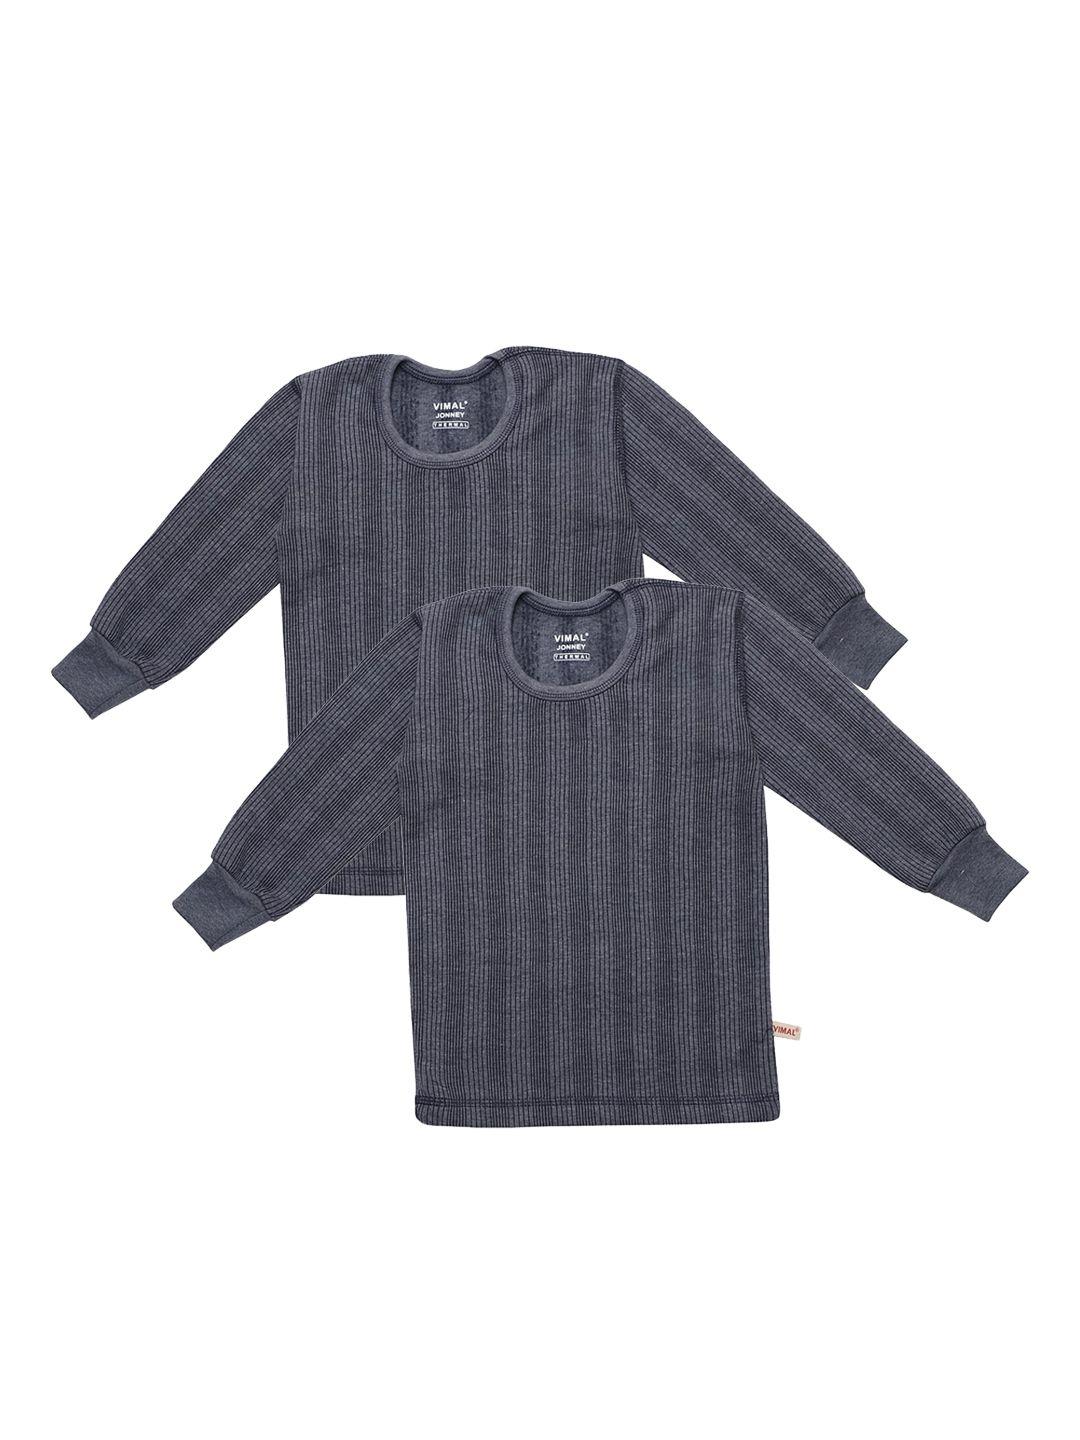 vimal jonney infant kids pack of 2 ribbed cotton thermal tops